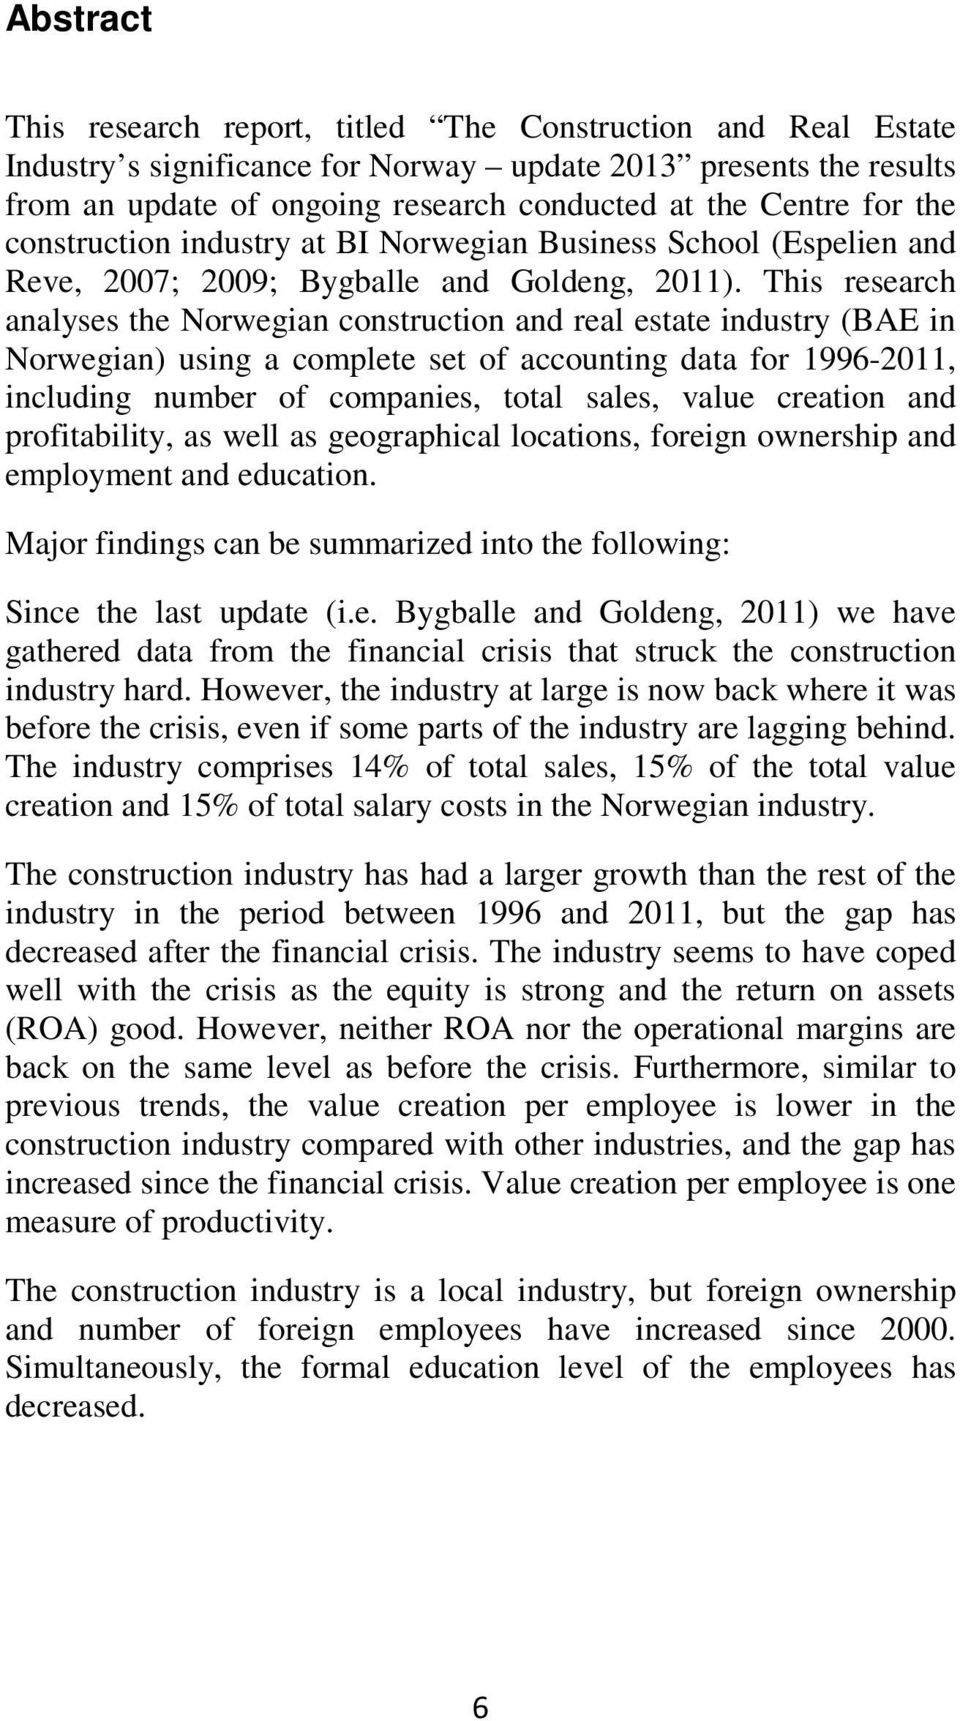 This research analyses the Norwegian construction and real estate industry (BAE in Norwegian) using a complete set of accounting data for 1996-2011, including number of companies, total sales, value